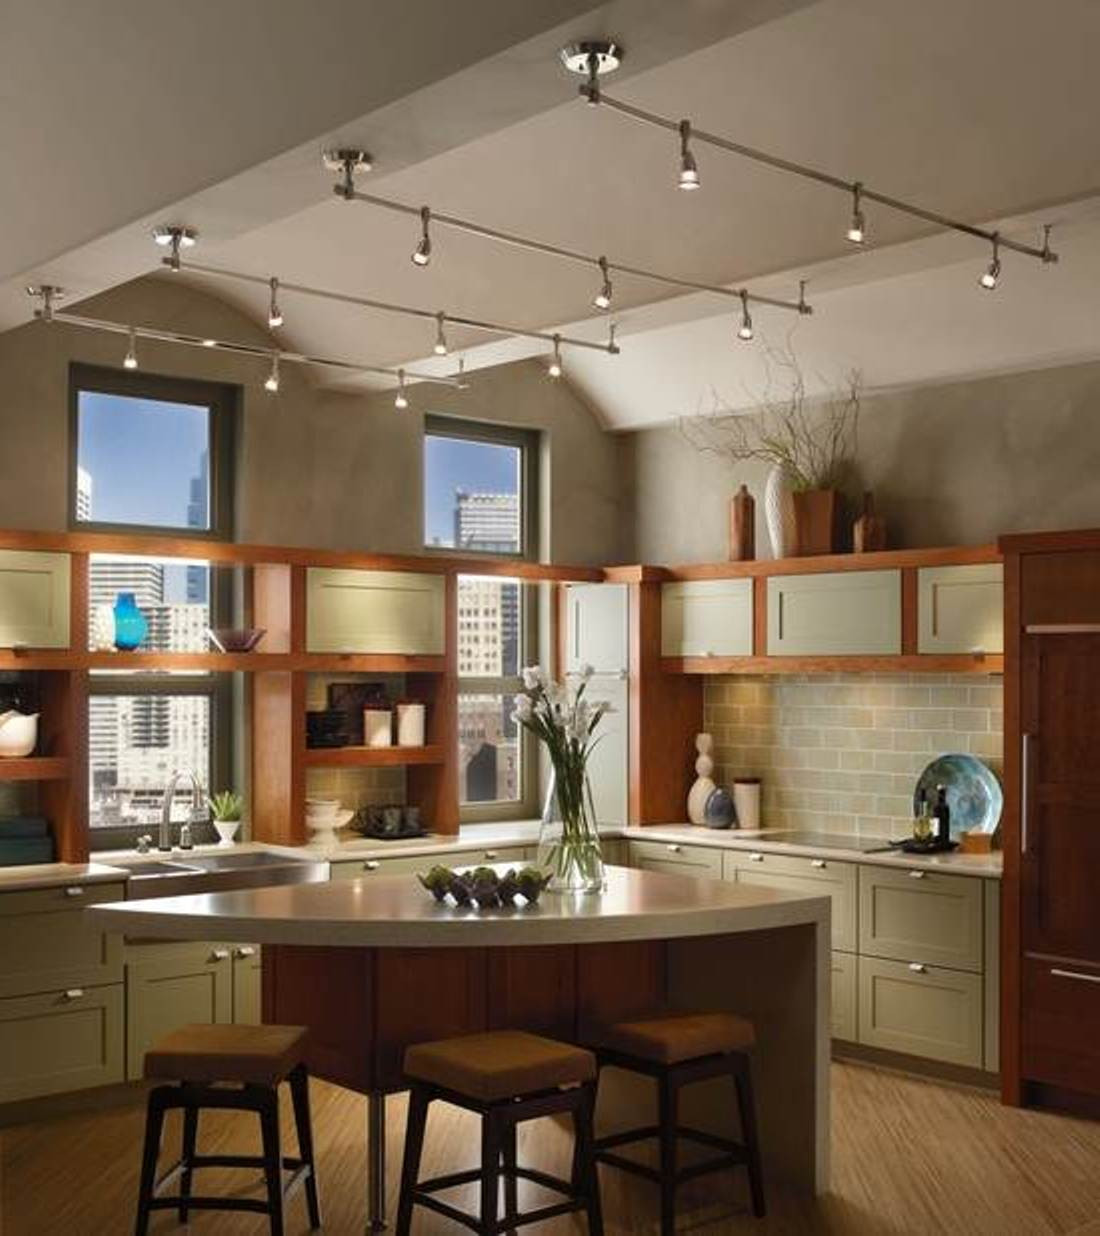 Track Lighting In Kitchen
 Different Types of Track Lighting Fixtures to Install